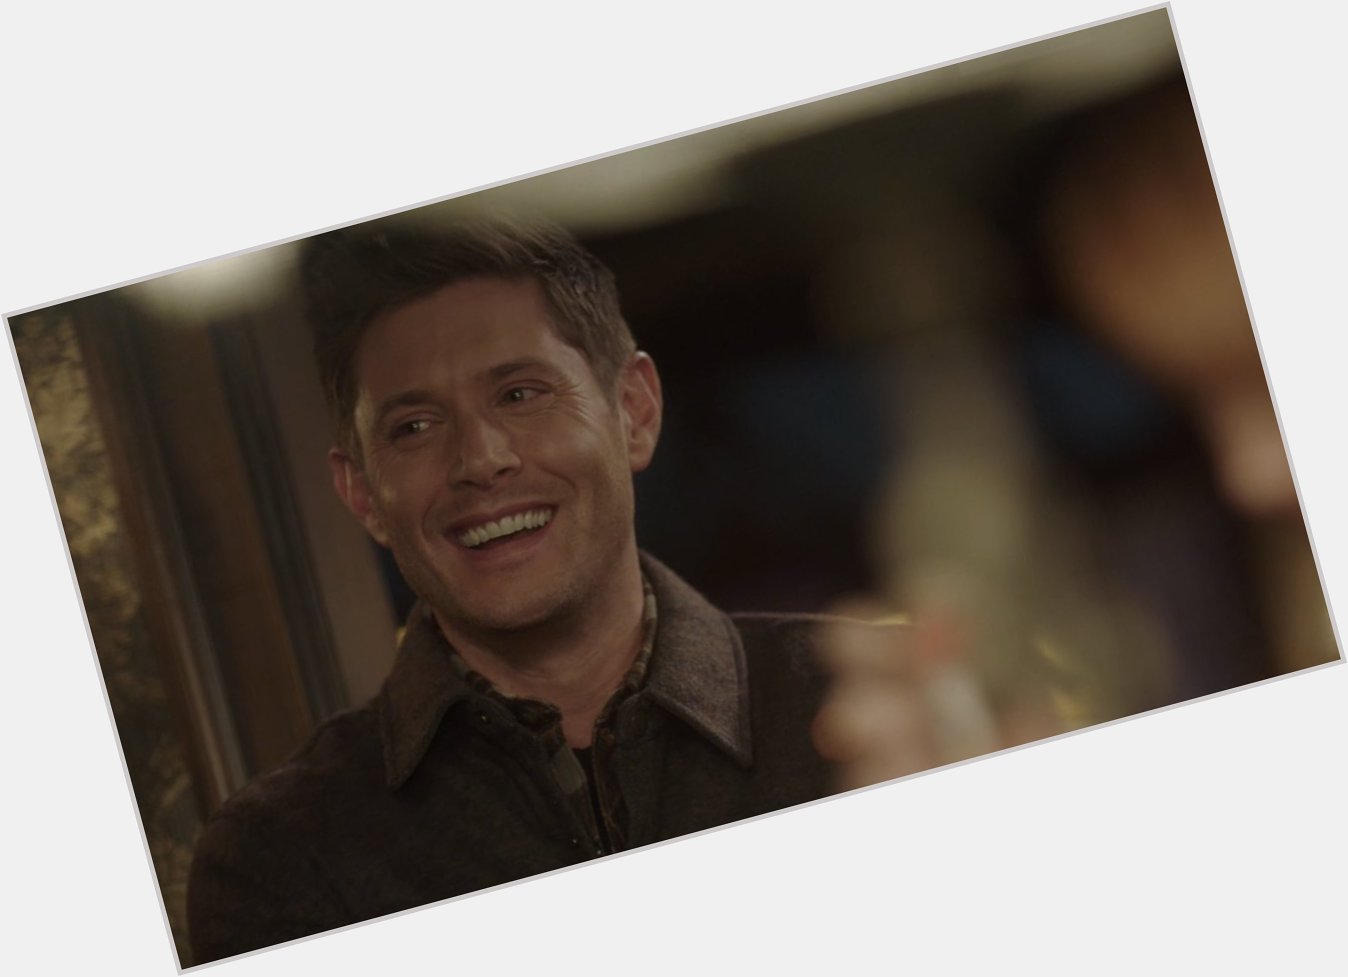 Happy birthday to our little ray of sunshine, Jensen Ackles  